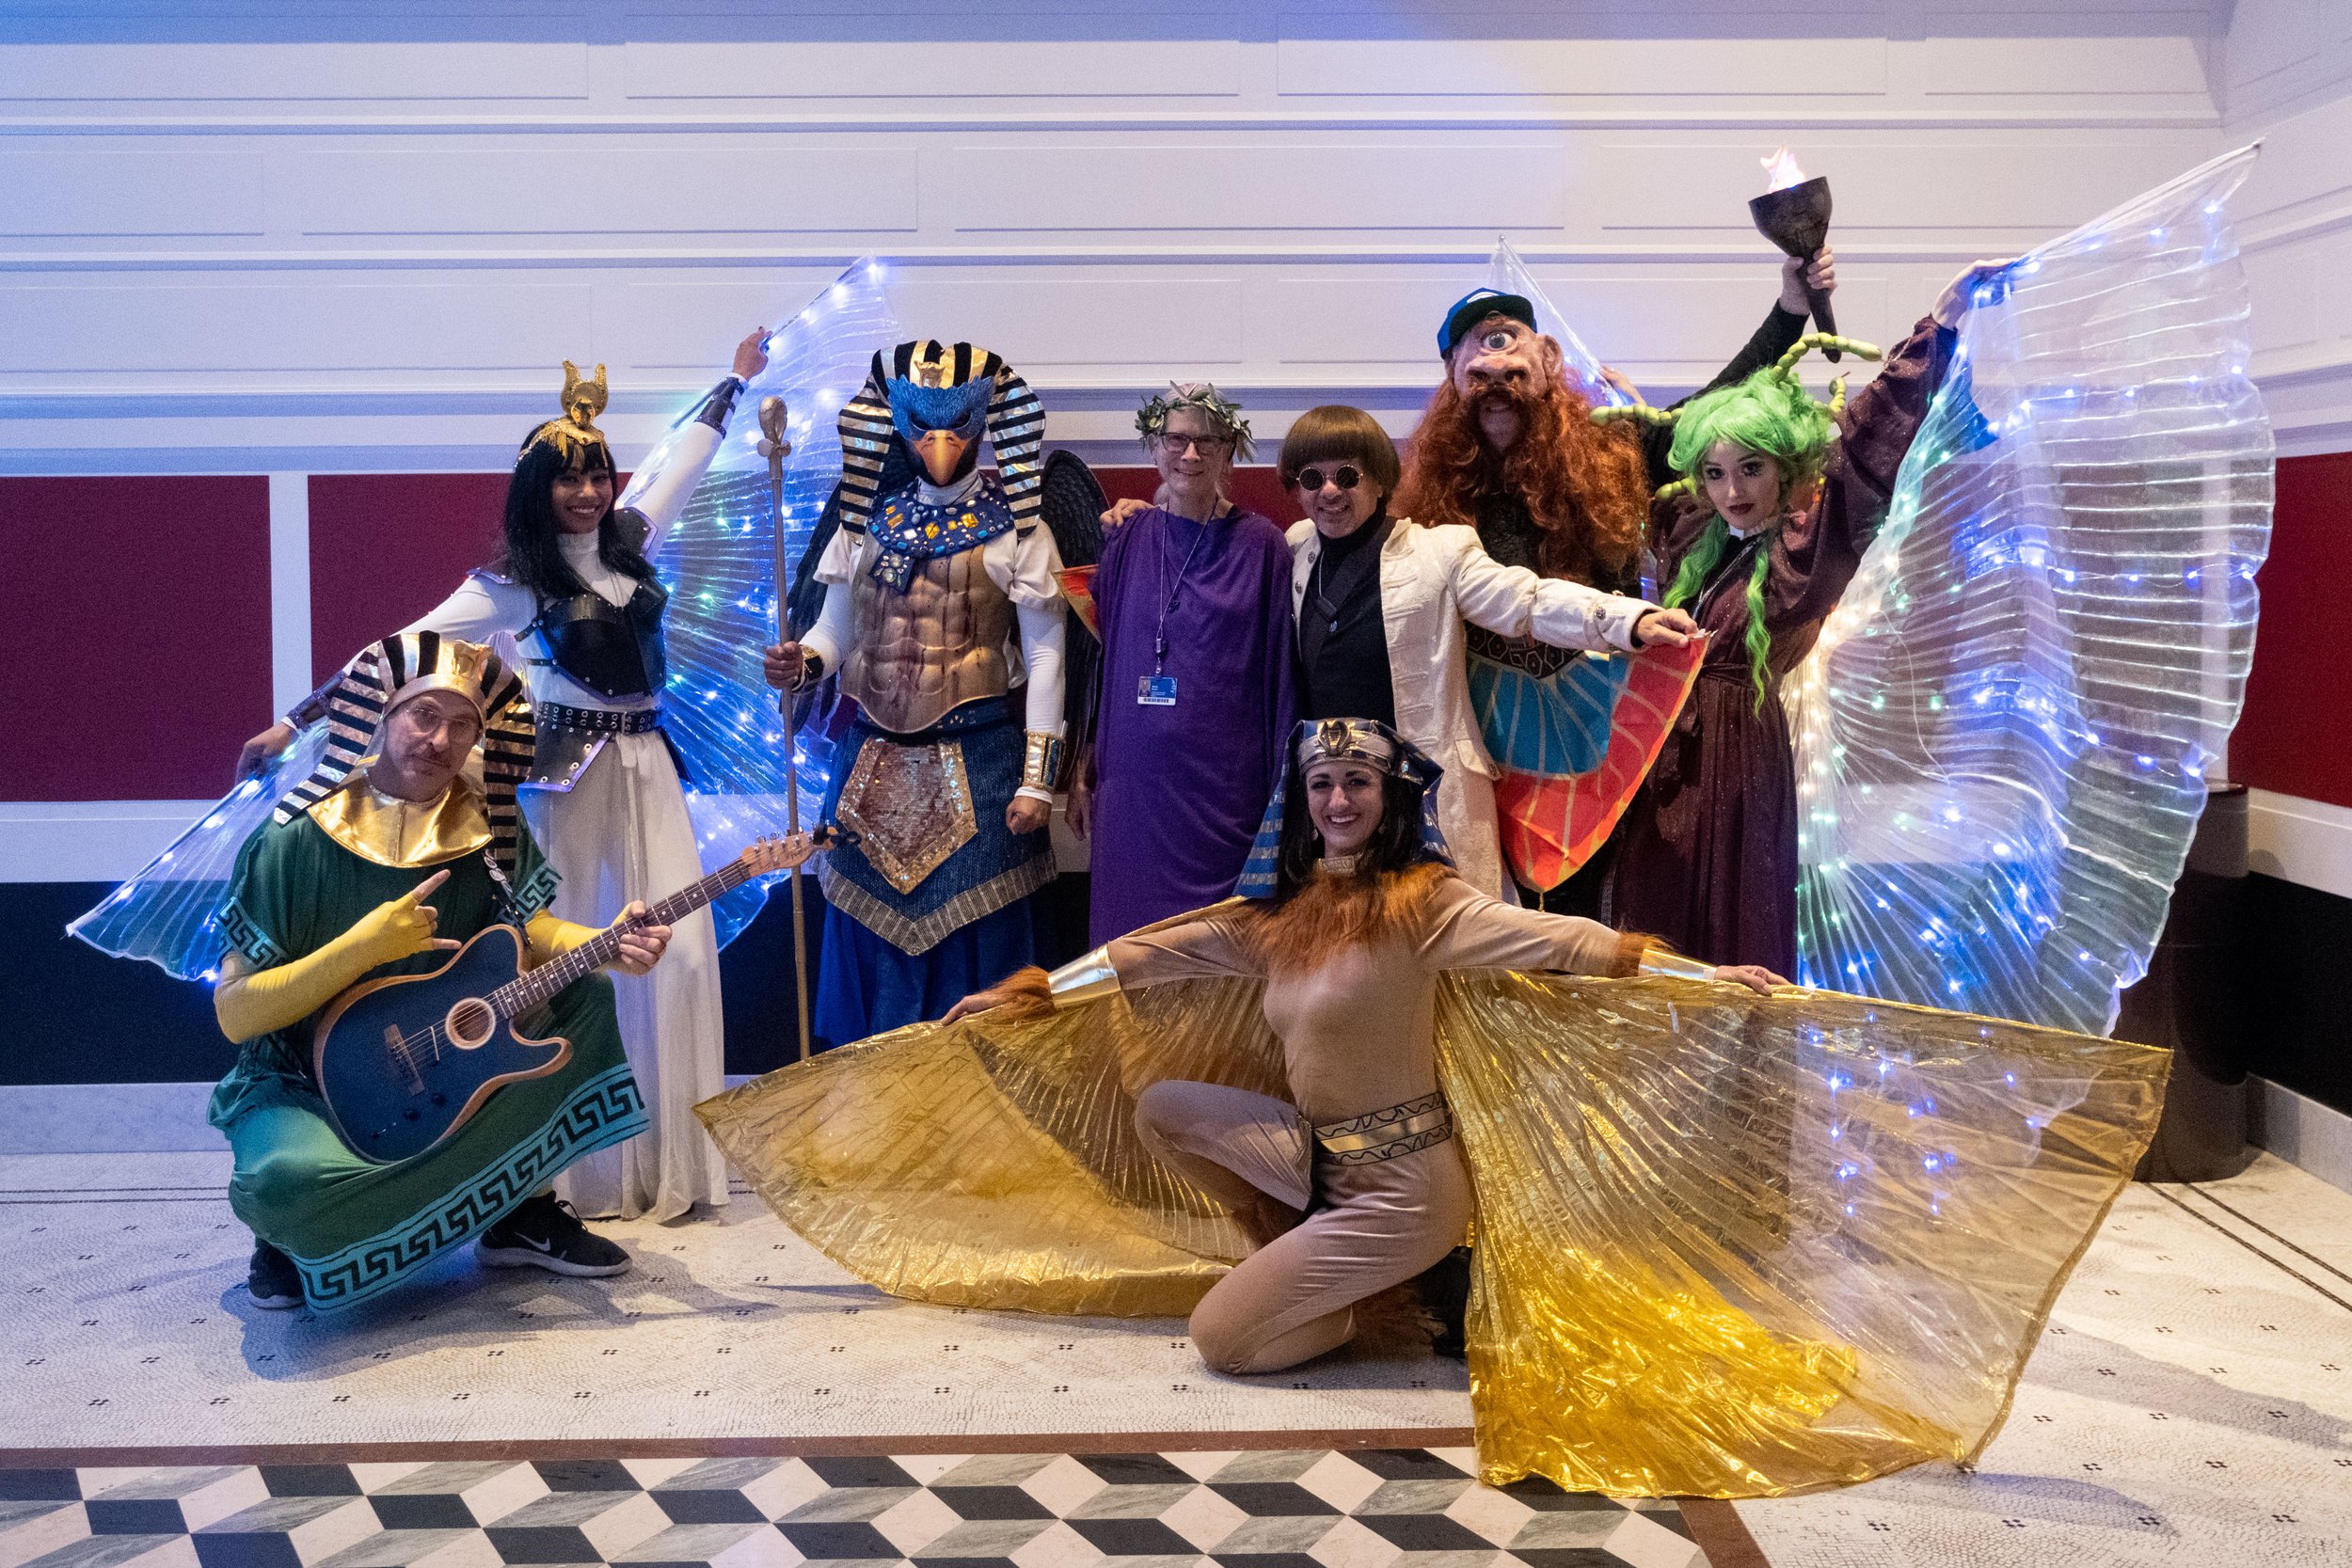  The Troubadour Theater, aka "The Troubies," pose with the organizer of the event, Dr. Shelby Brown, at the Getty Villa Museum in Pacific Palisades, Calif. on Wednesday, March 22, 2023 at College Night. From L to R: The Sphinx, the Goddess Hathor, th